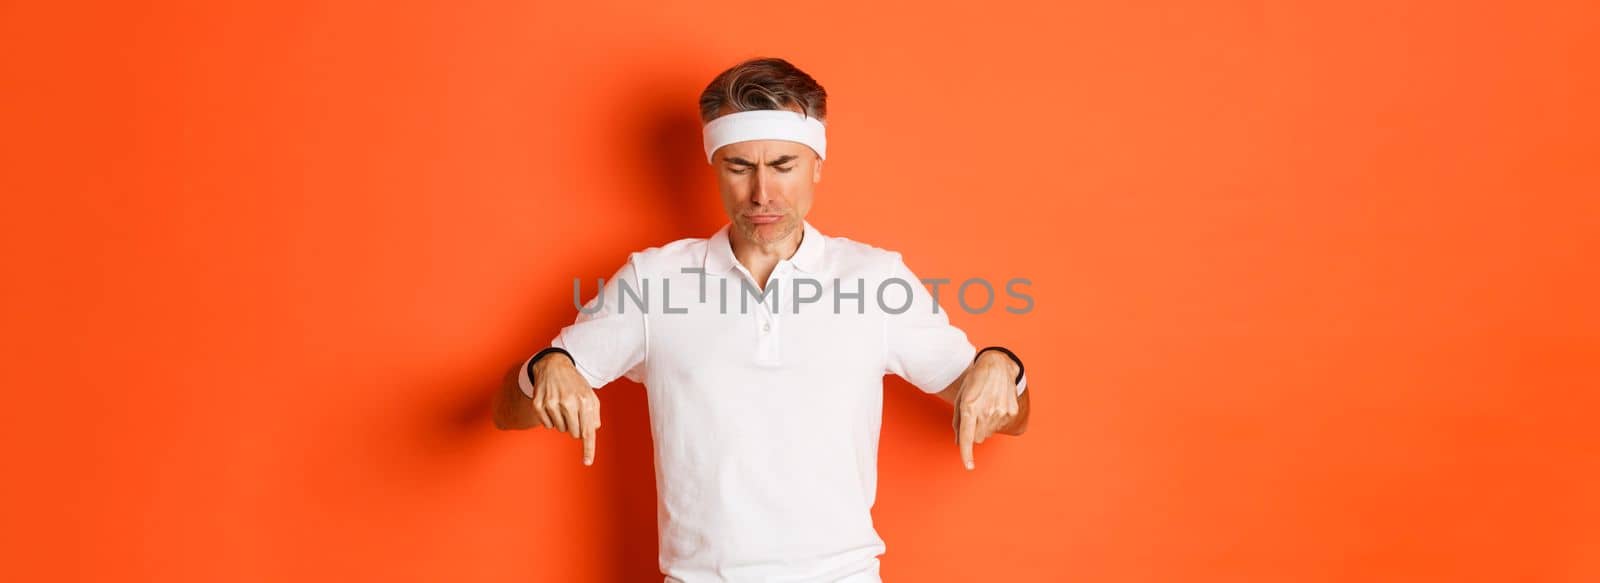 Concept of workout, sports and lifestyle. Image of disappointed and sad adult sportsman, looking and pointing down distressed, frowning upset, standing over orange background.